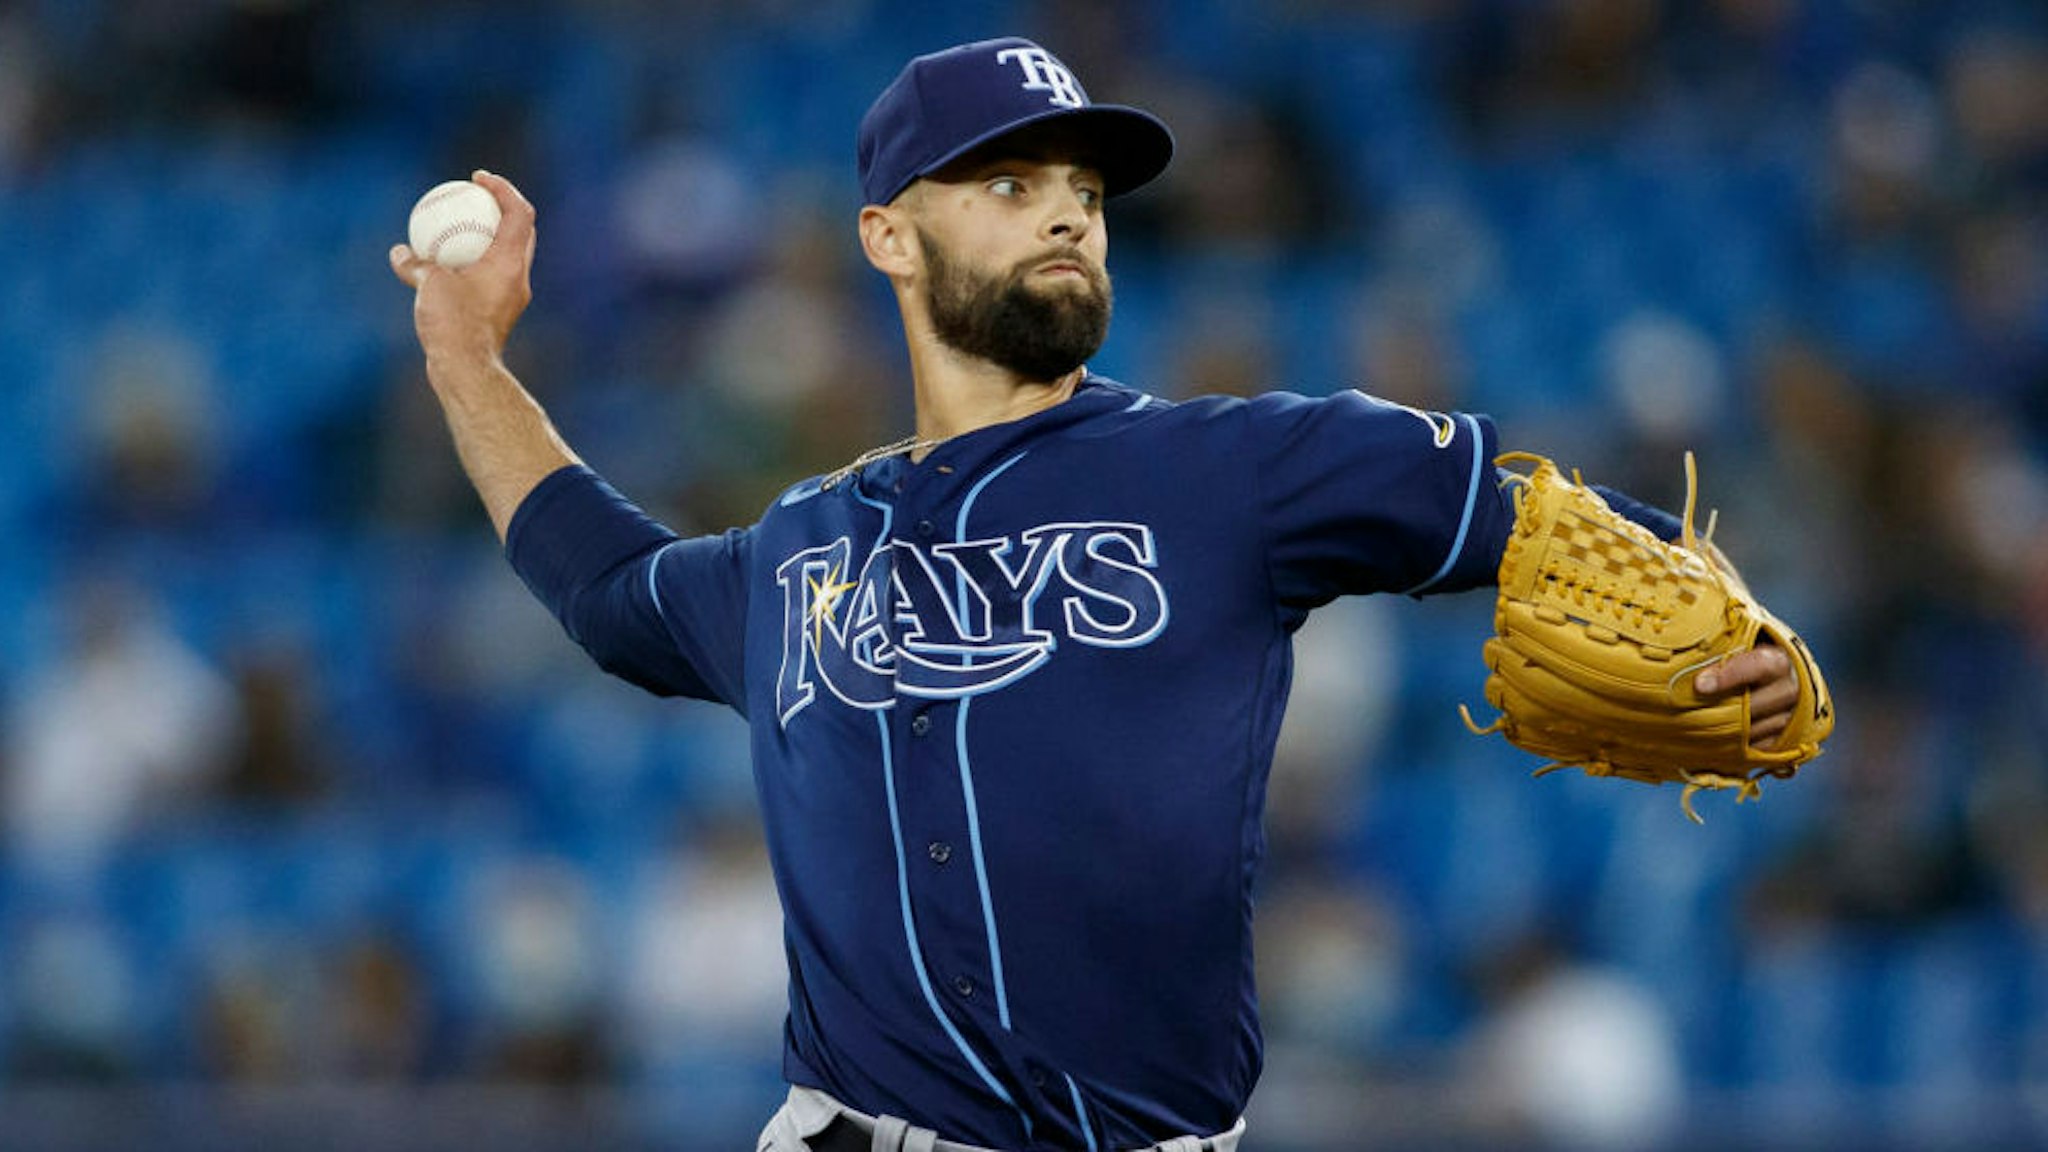 Nick Anderson #70 of the Tampa Bay Rays pitches in the seventh inning of their MLB game against the Tampa Bay Rays at Rogers Centre on September 13, 2021 in Toronto, Ontario.